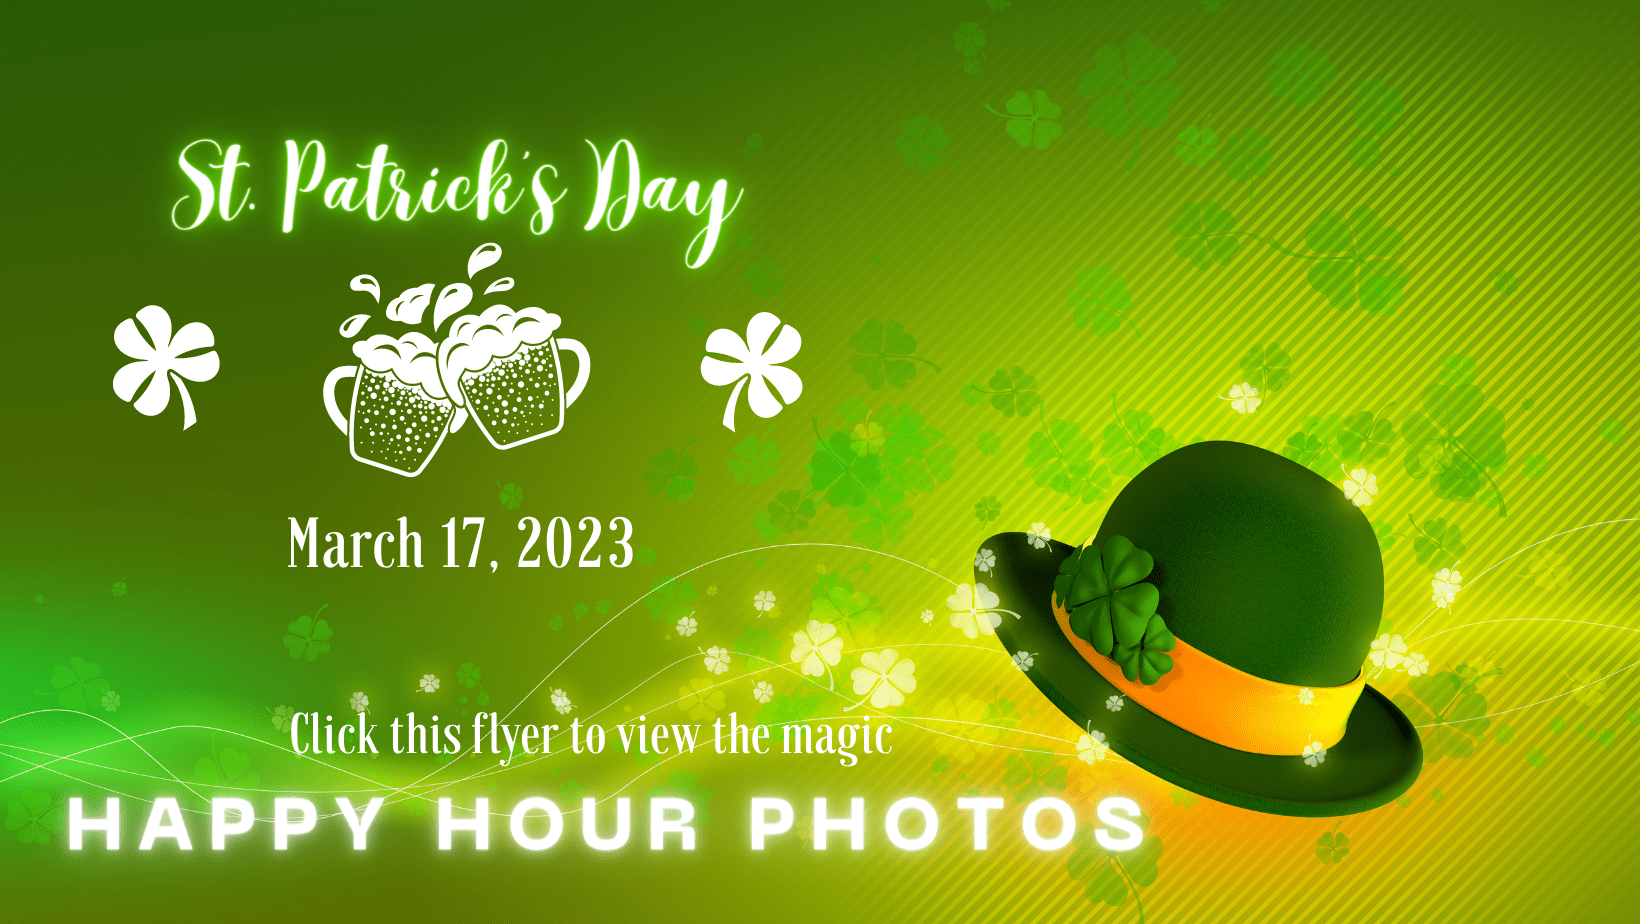 Green Festive Saint Patrick's Day Greeting Facebook Cover